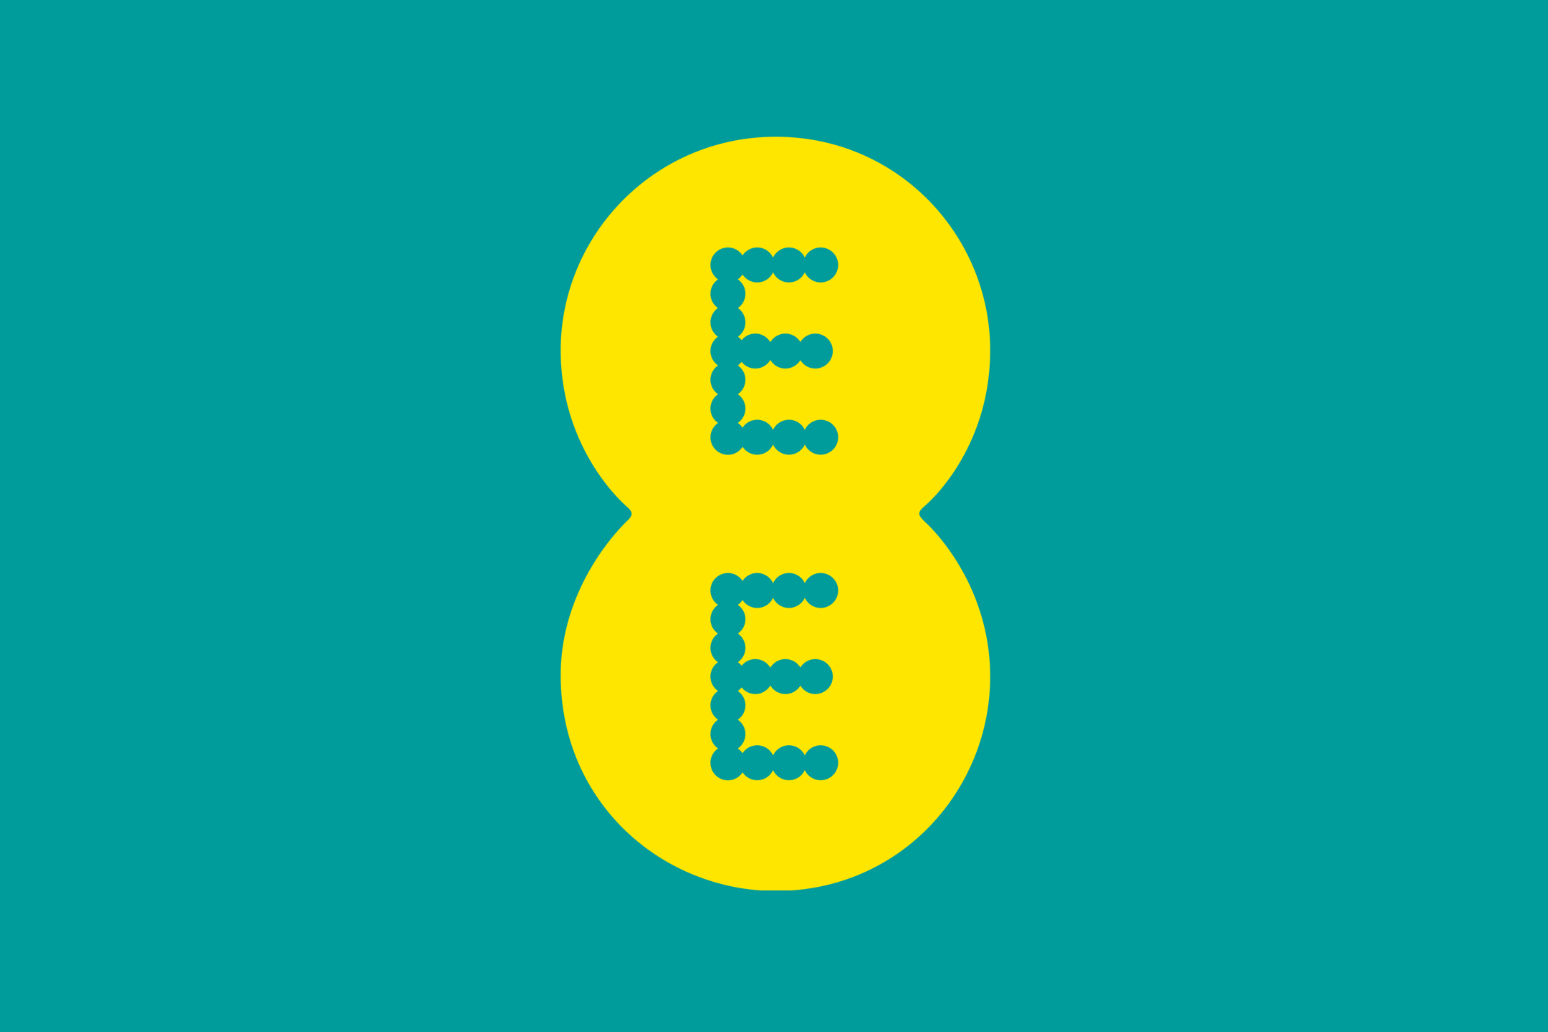 EE to bring back roaming charges when travelling to European countries from 2022 